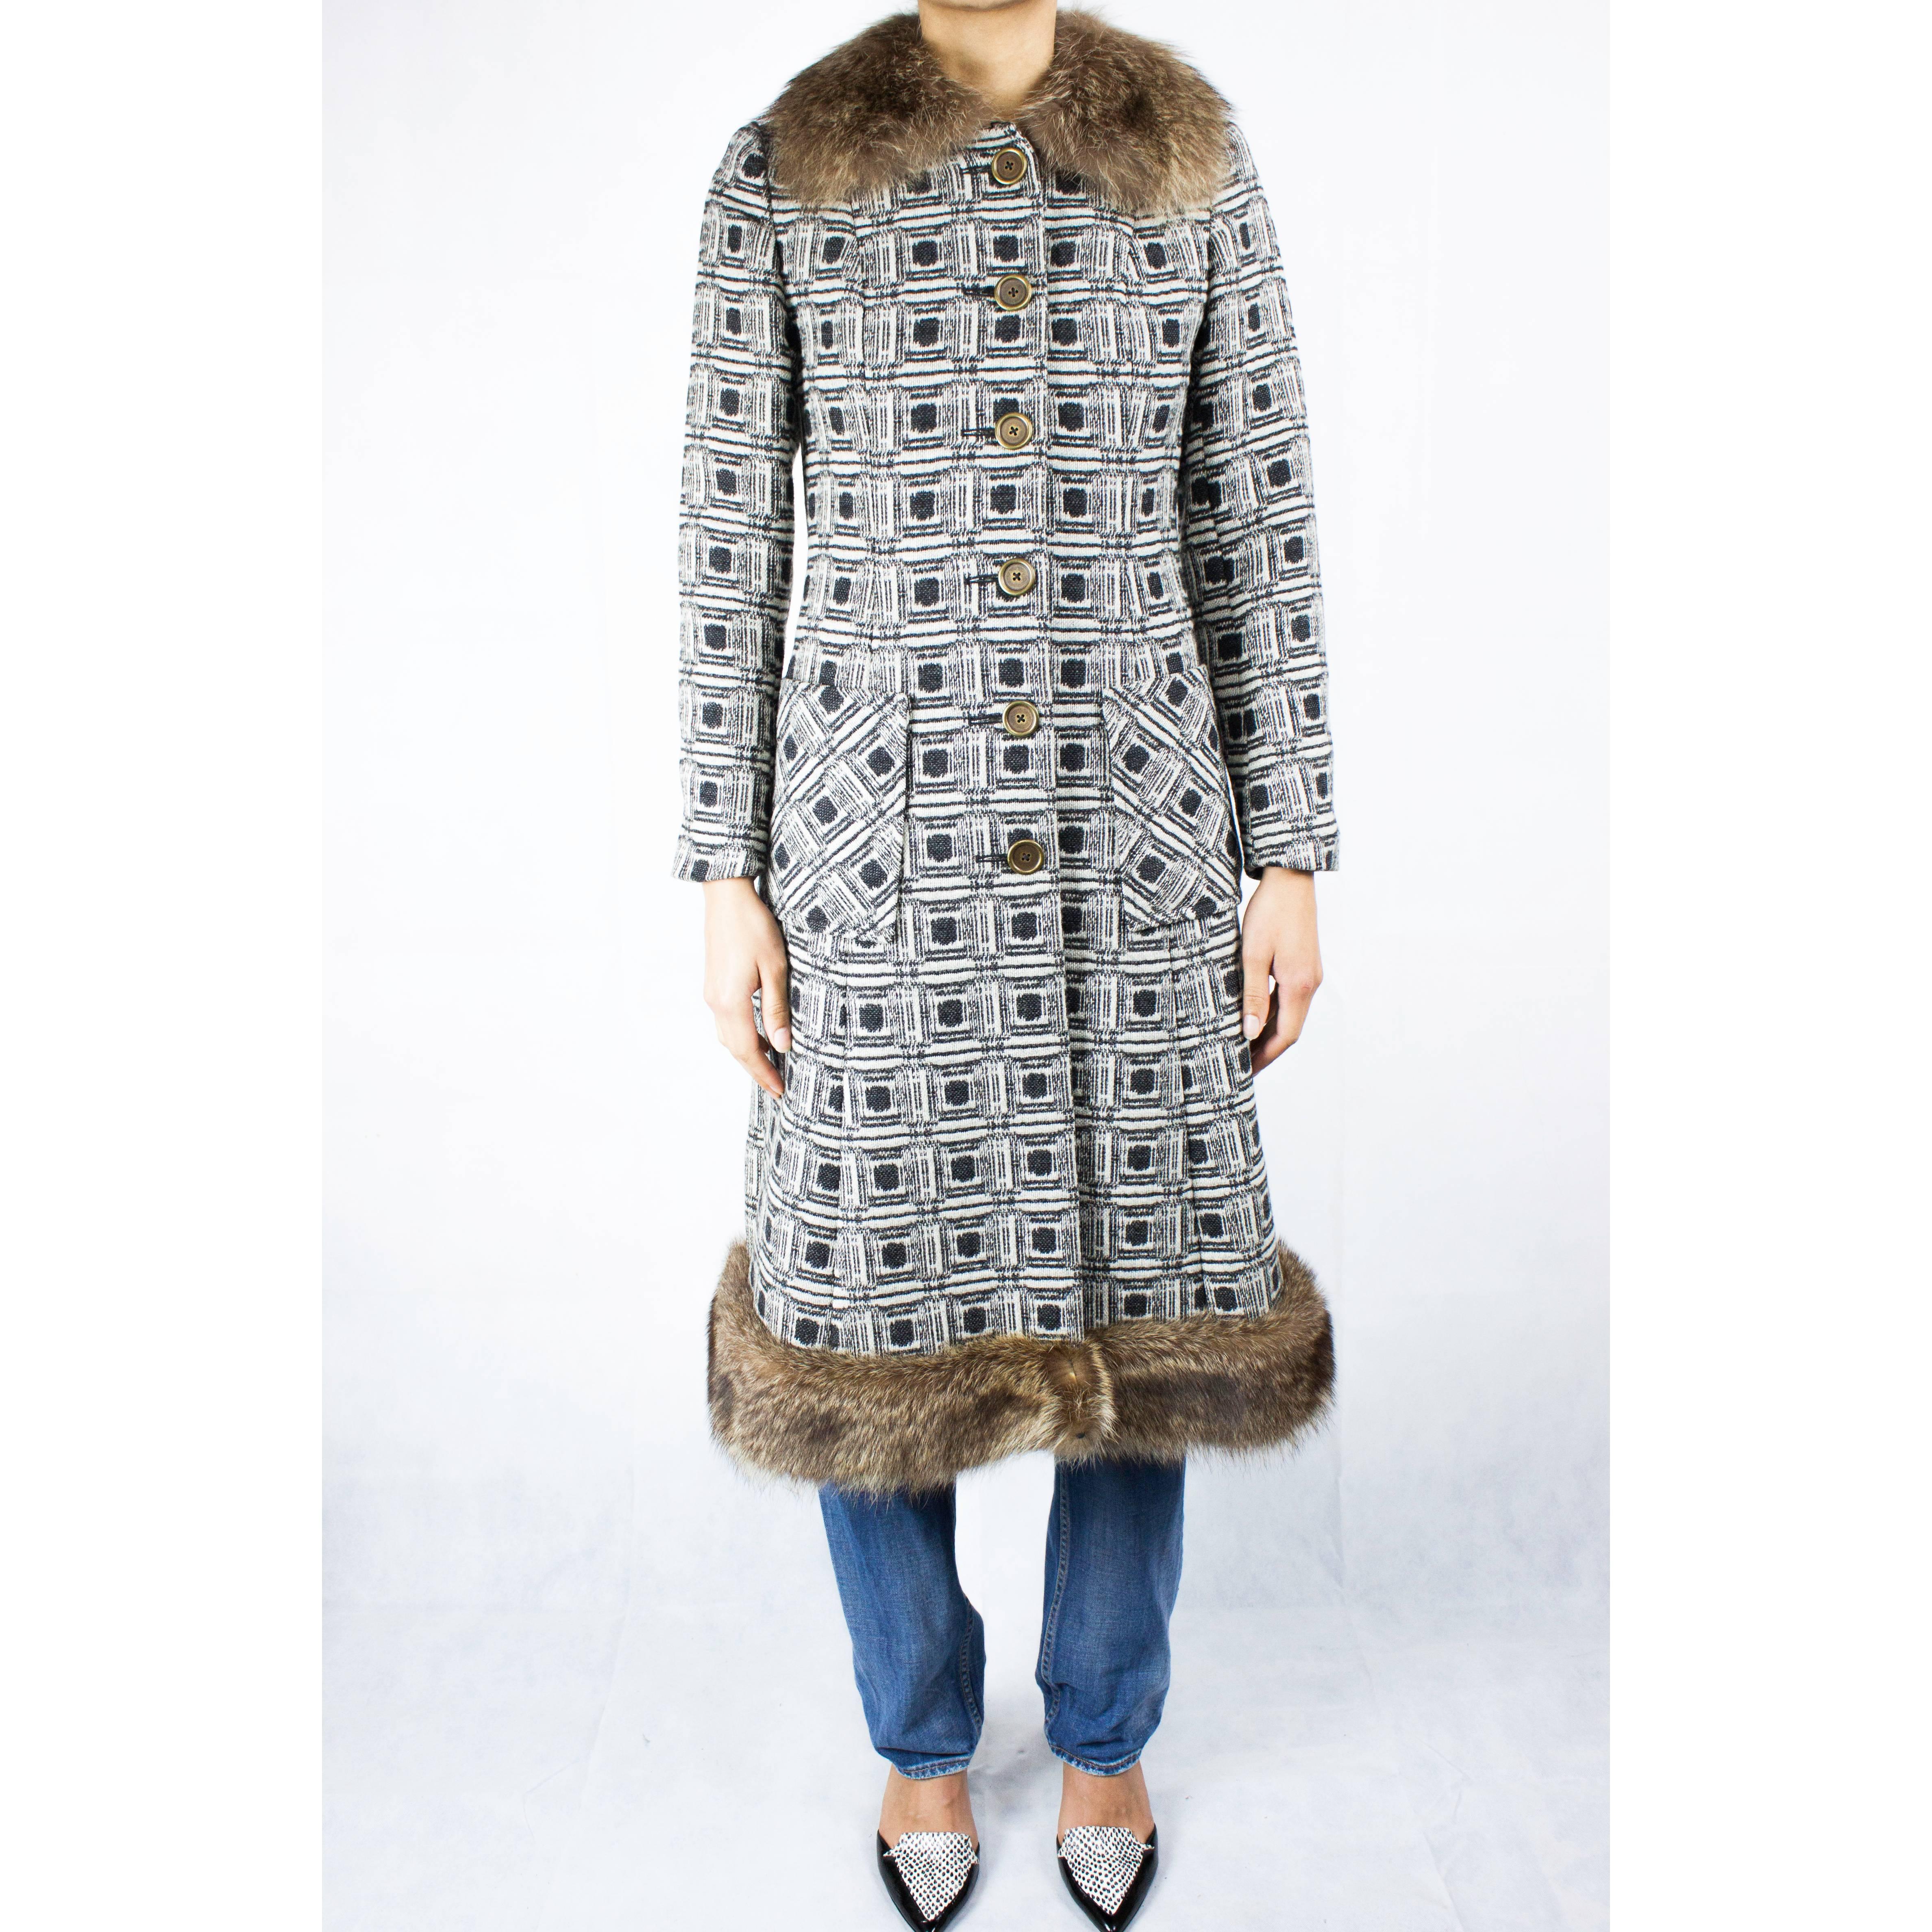 This wool coat is a delight of squares, dots and lines. This geometric patterned coat is constructed from a wool cloth. It has a classic 1960s slim silhouette. Featuring single breasted closure that fastens to the front with metal buttons.